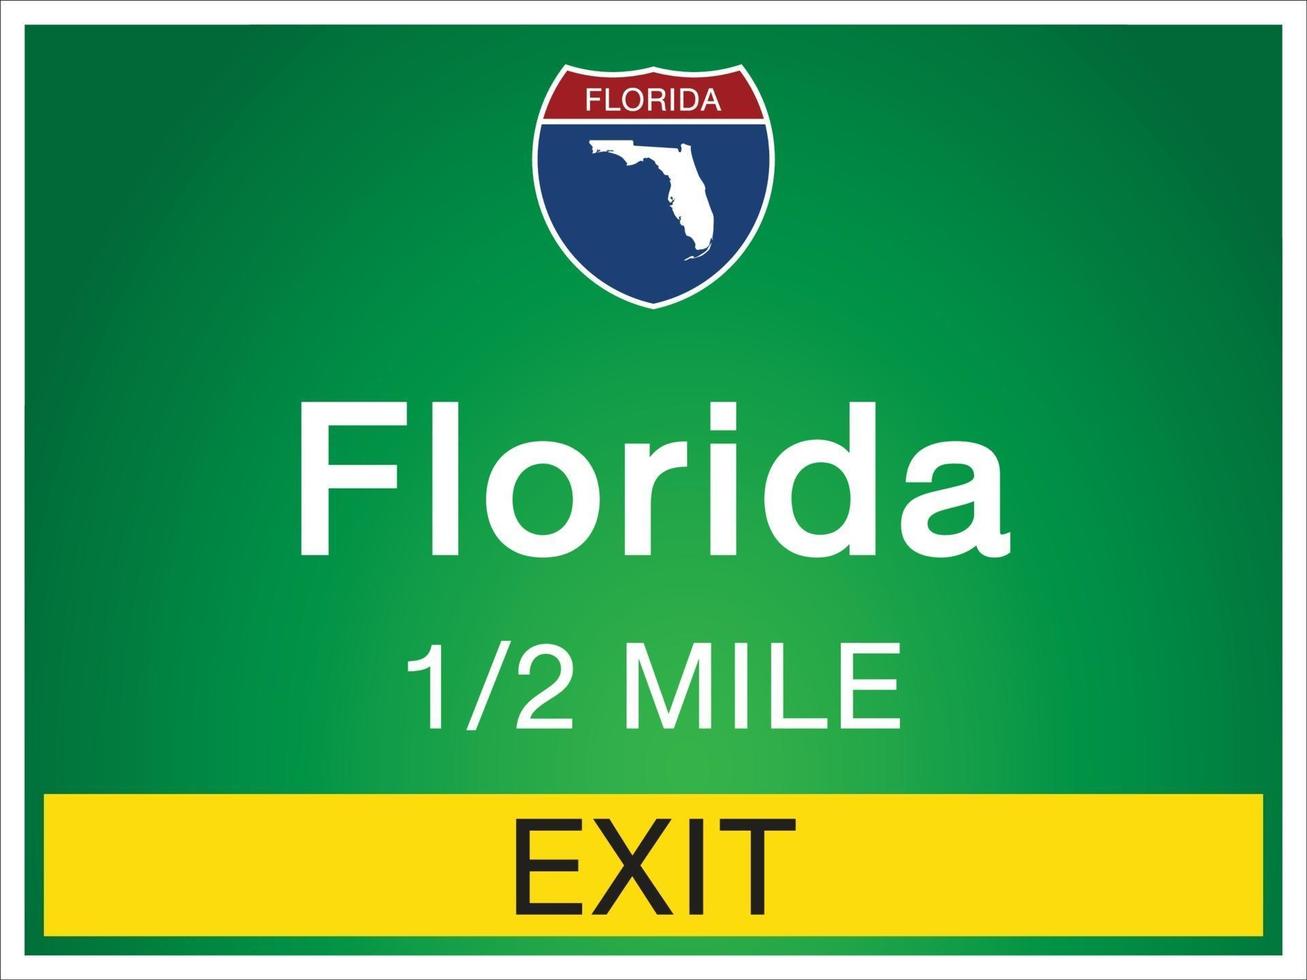 Highway signs before the exit To Florida state information and maps vector